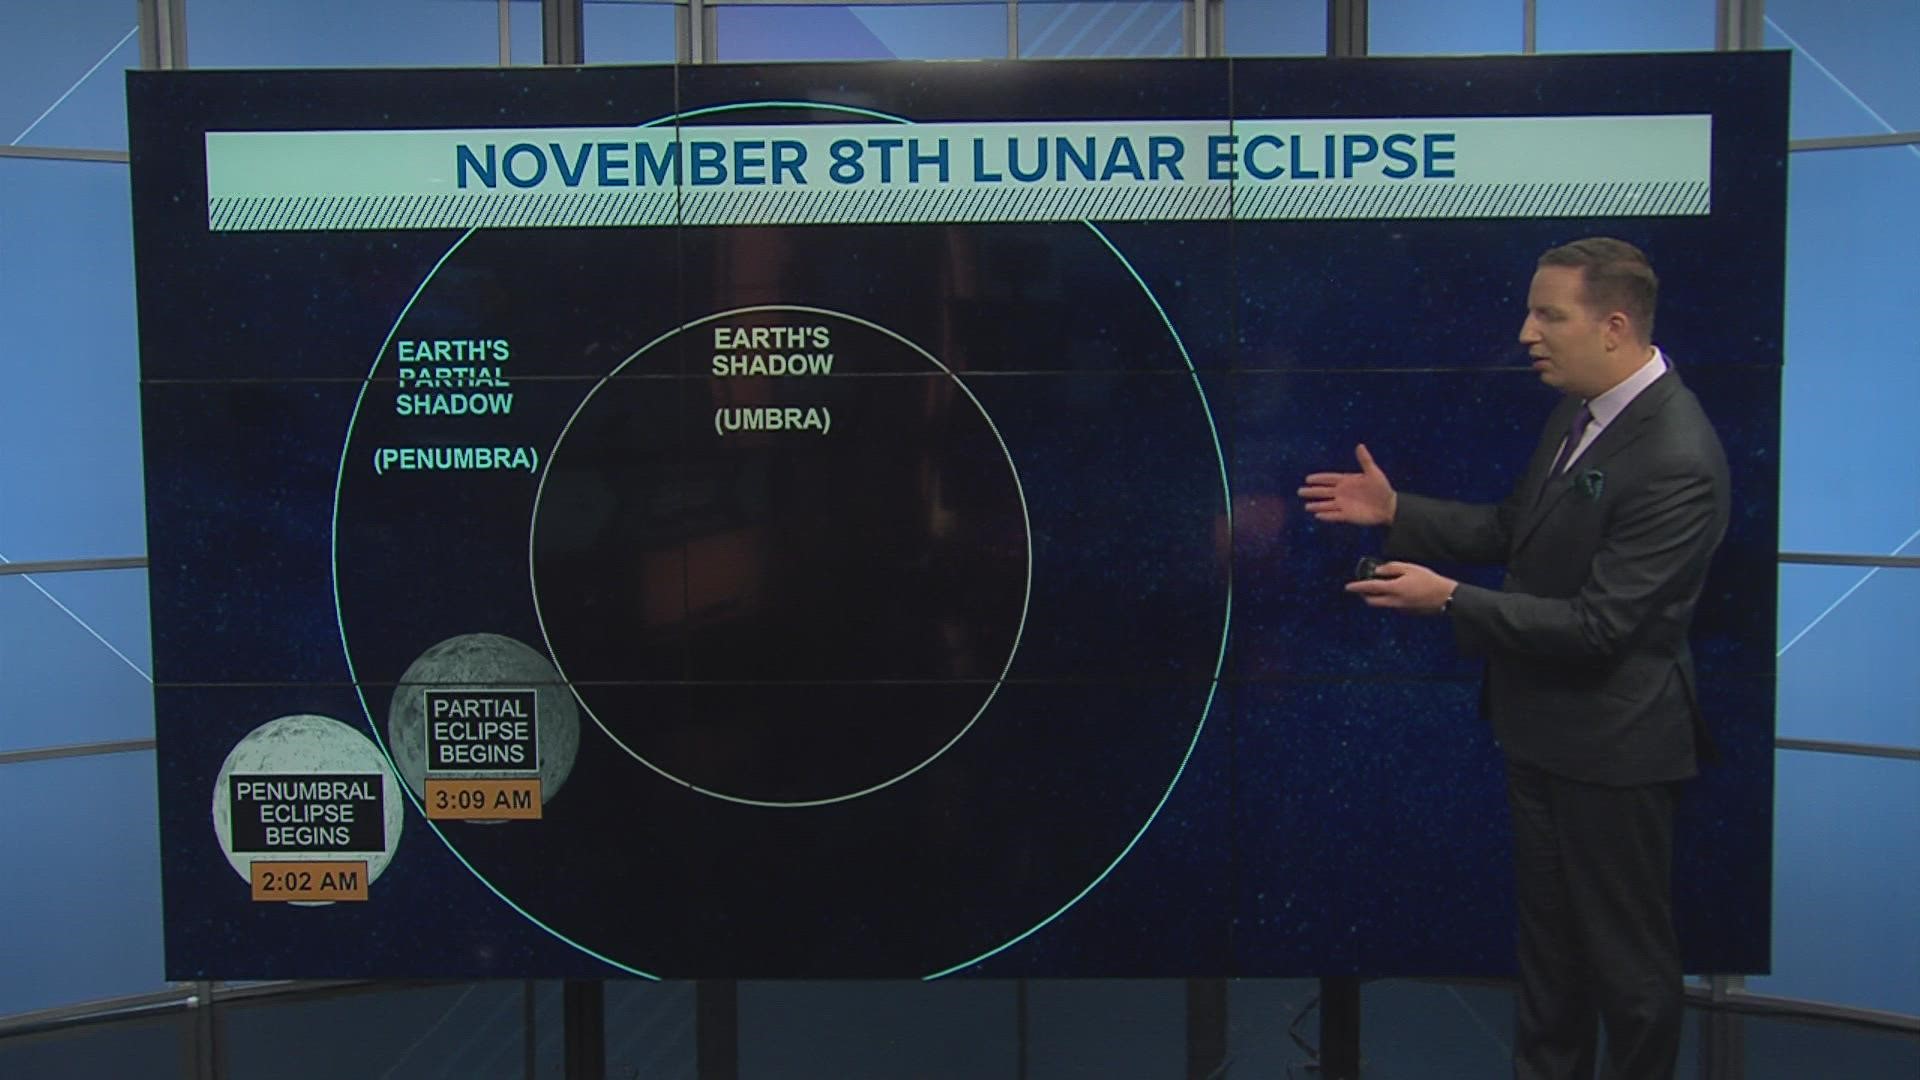 Lunar eclipse will take place on Election Day